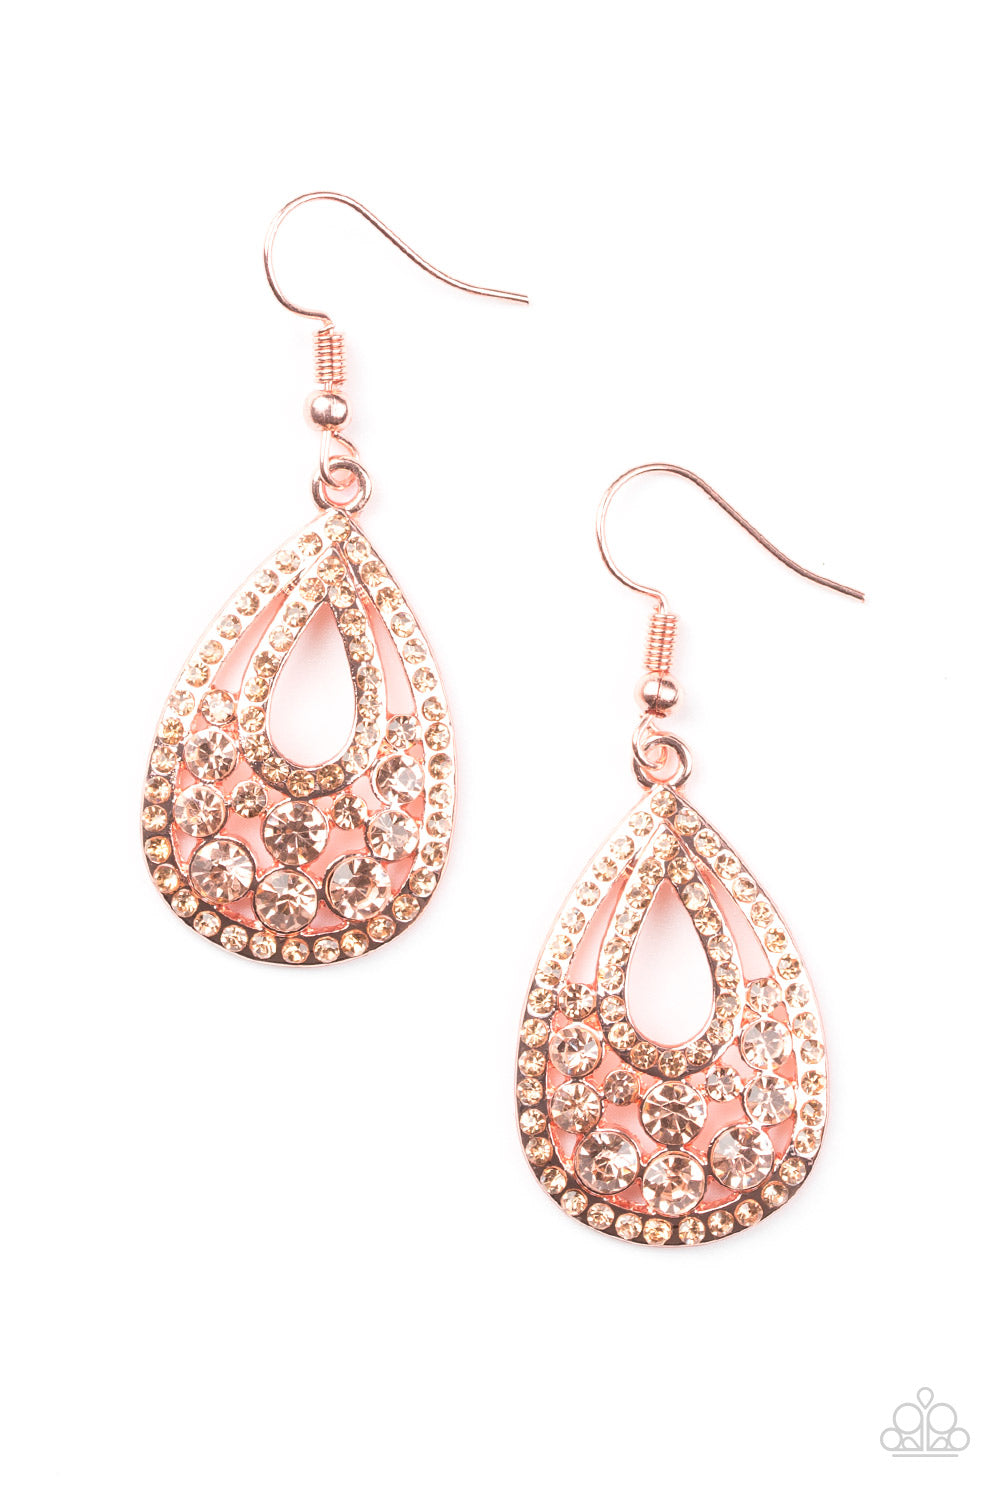 Paparazzi Accessories Sparkling Stardom - Copper Earrings 